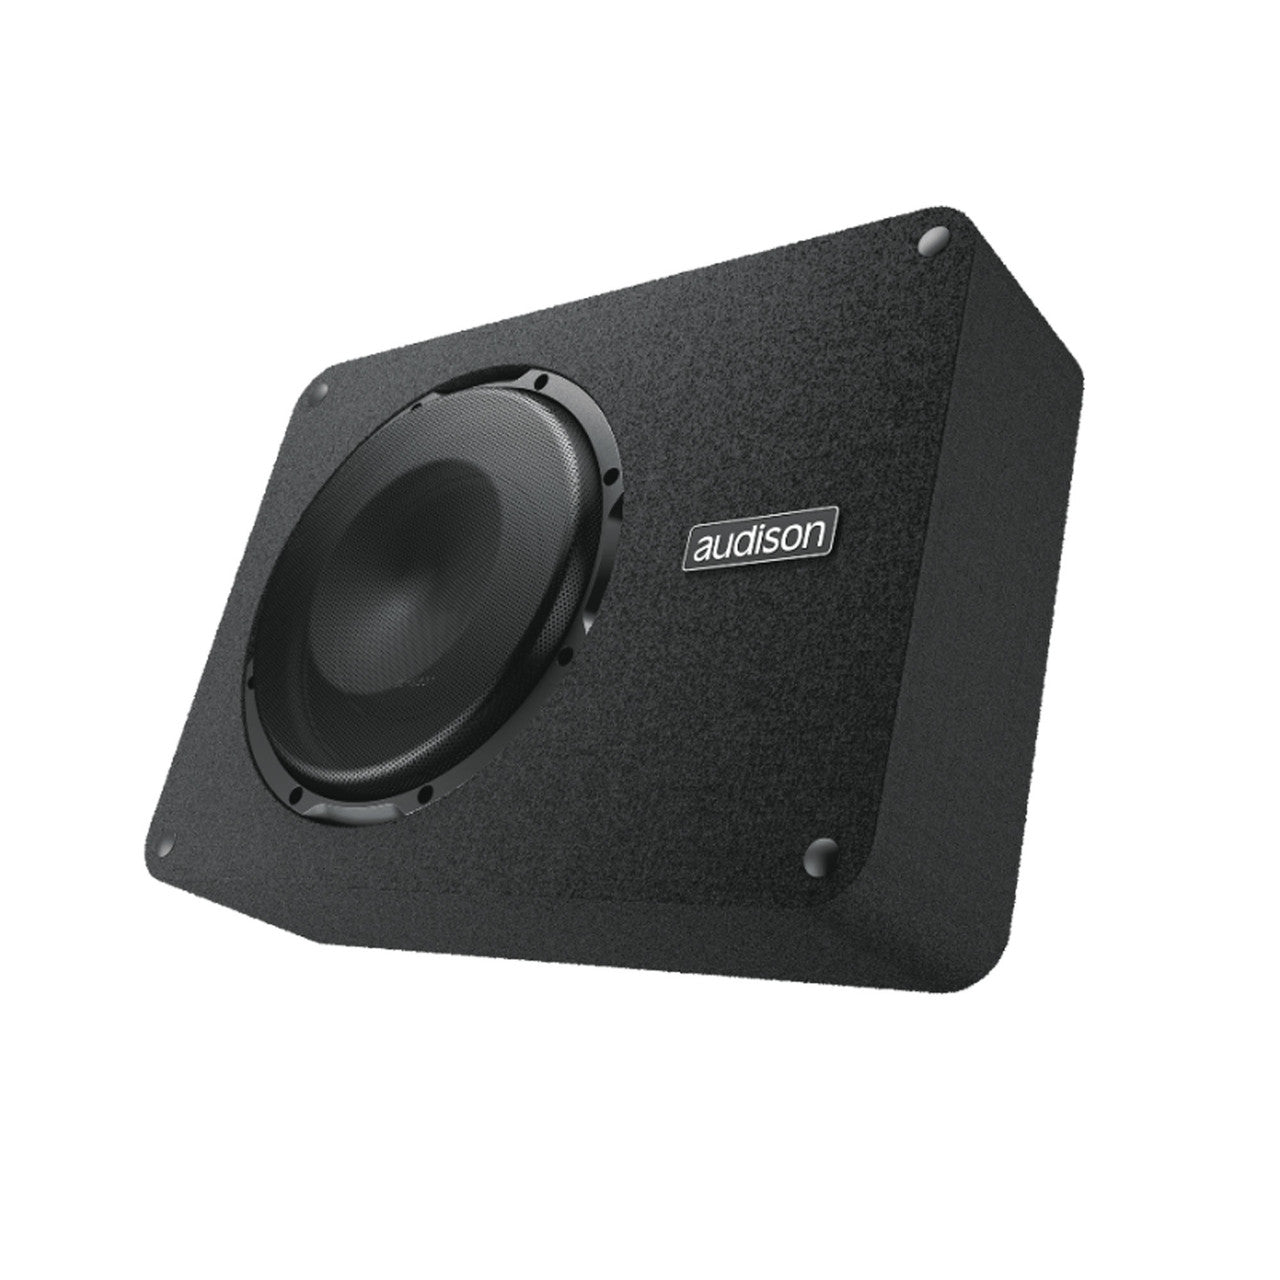 Audison F-150 15-17 5.9 Audison Front, Rear, Amp, and 8" Sub Bundle Compatible with 15-17 Ford F-150 Non Sony Sound Systems